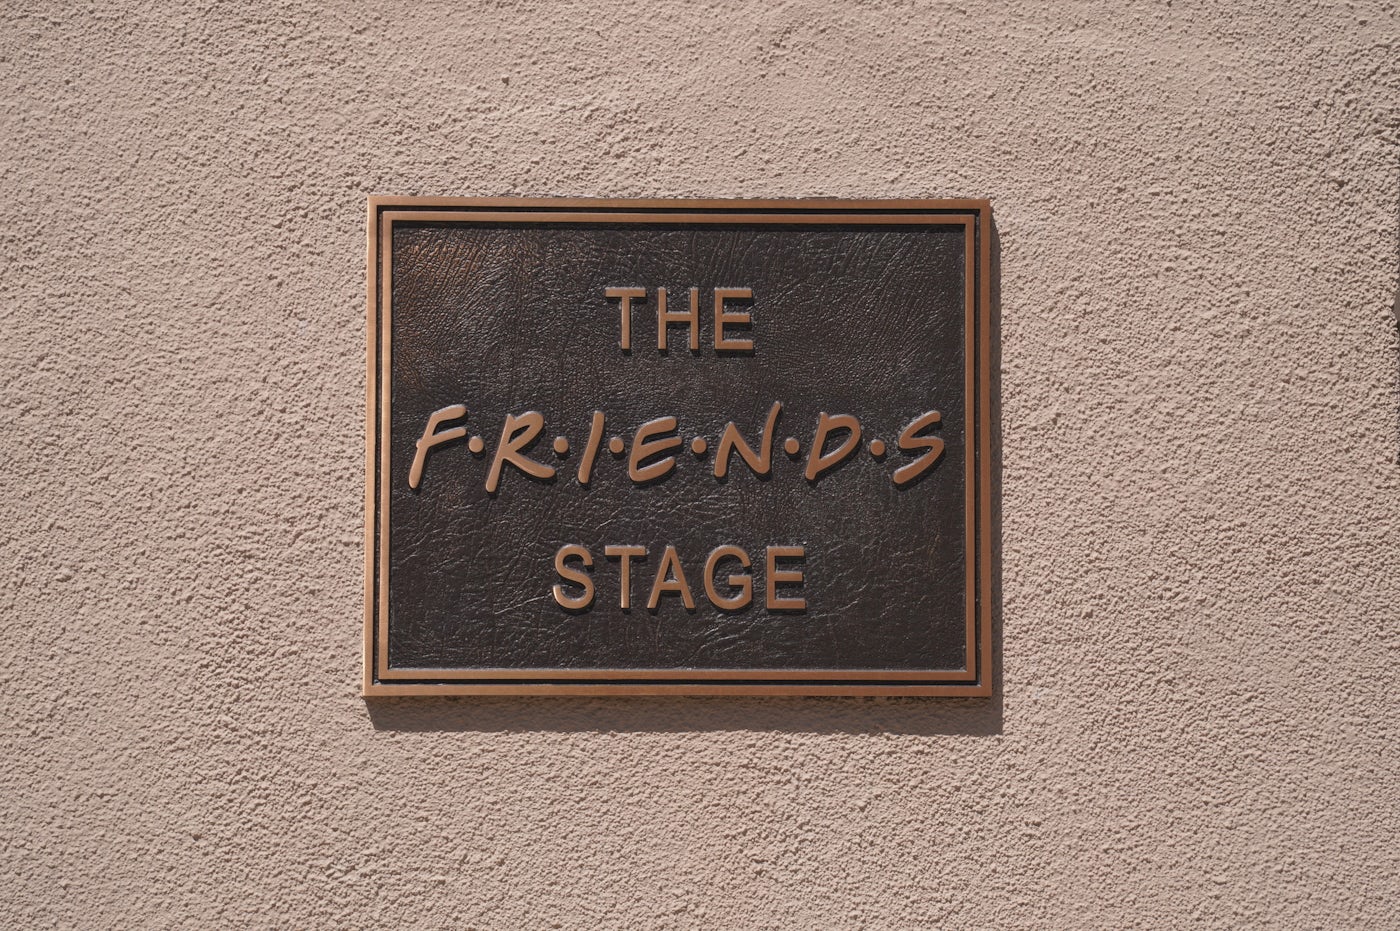 Friends The Reunion': Trailers and cast reactions